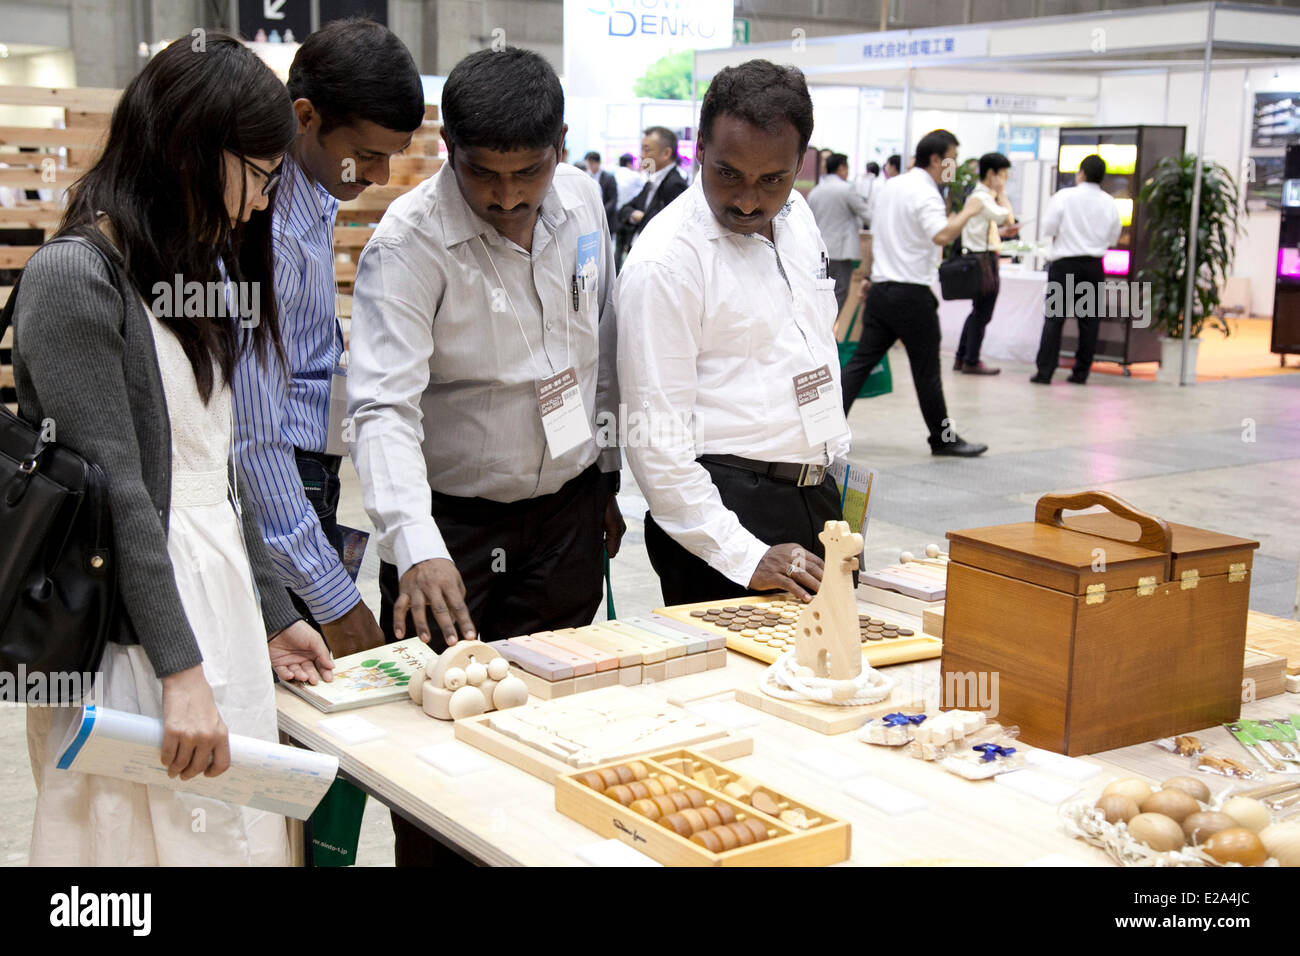 Tokyo, Japan. 18th June, 2014. – Visitors see different products made by wood at the Smart Community Japan 2014 in Tokyo Big Sight on June 18, 2014. The exhibition brings the latests products and technologies divided in 5 categories, 'Smart Community Exhibition', 'Biomass Expo', 'Next Generation Vehicle Exhibition, and newly-created 'Community Cloud 2014', which introduces technology for urban development. This year 229 enterprises and organizations shows their products from June 18th to 20th. Credit:  Aflo Co. Ltd./Alamy Live News Stock Photo